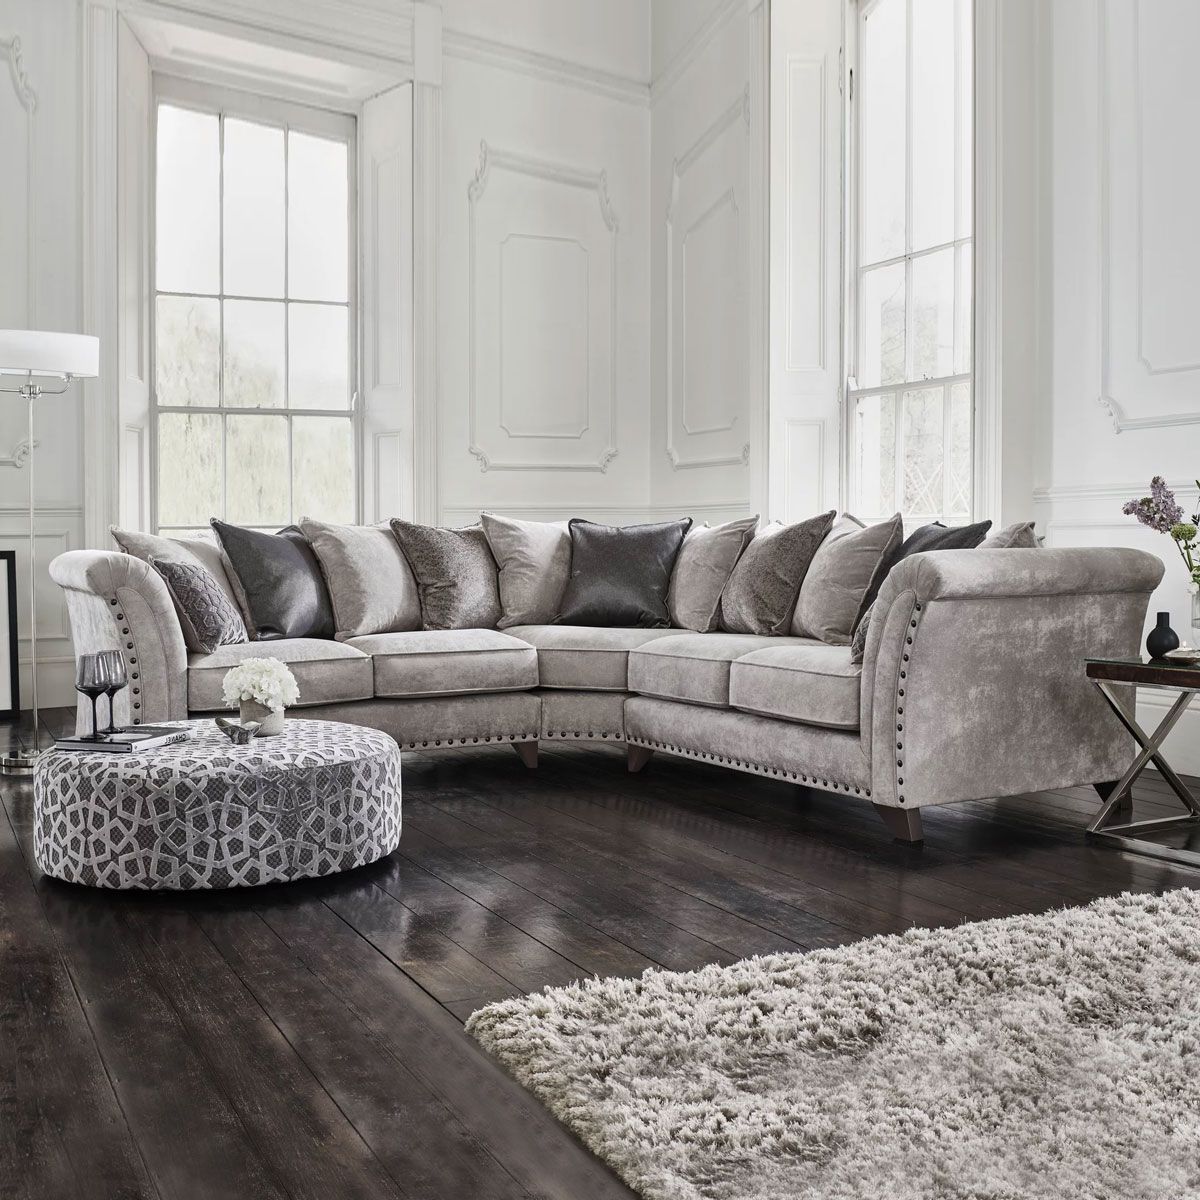 Alexander Large Fabric Pillow Back Corner Sofa With Studs From Aed 6849 |  Ah Furniture In Pillowback Sofa Sectionals (Gallery 17 of 20)